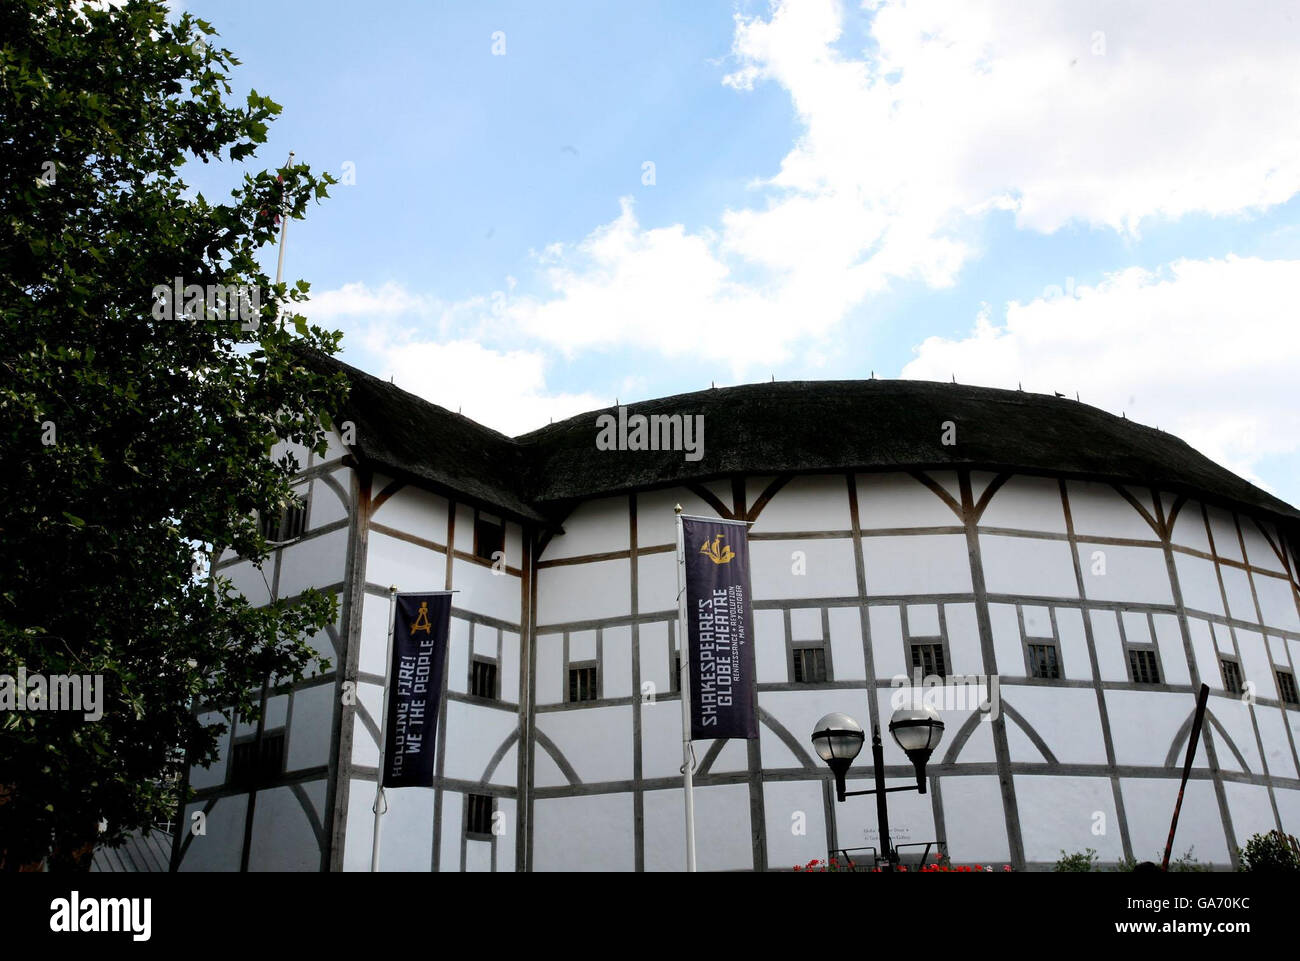 General view of The Globe Theatre. A general view of The Globe Theatre, central London. Stock Photo